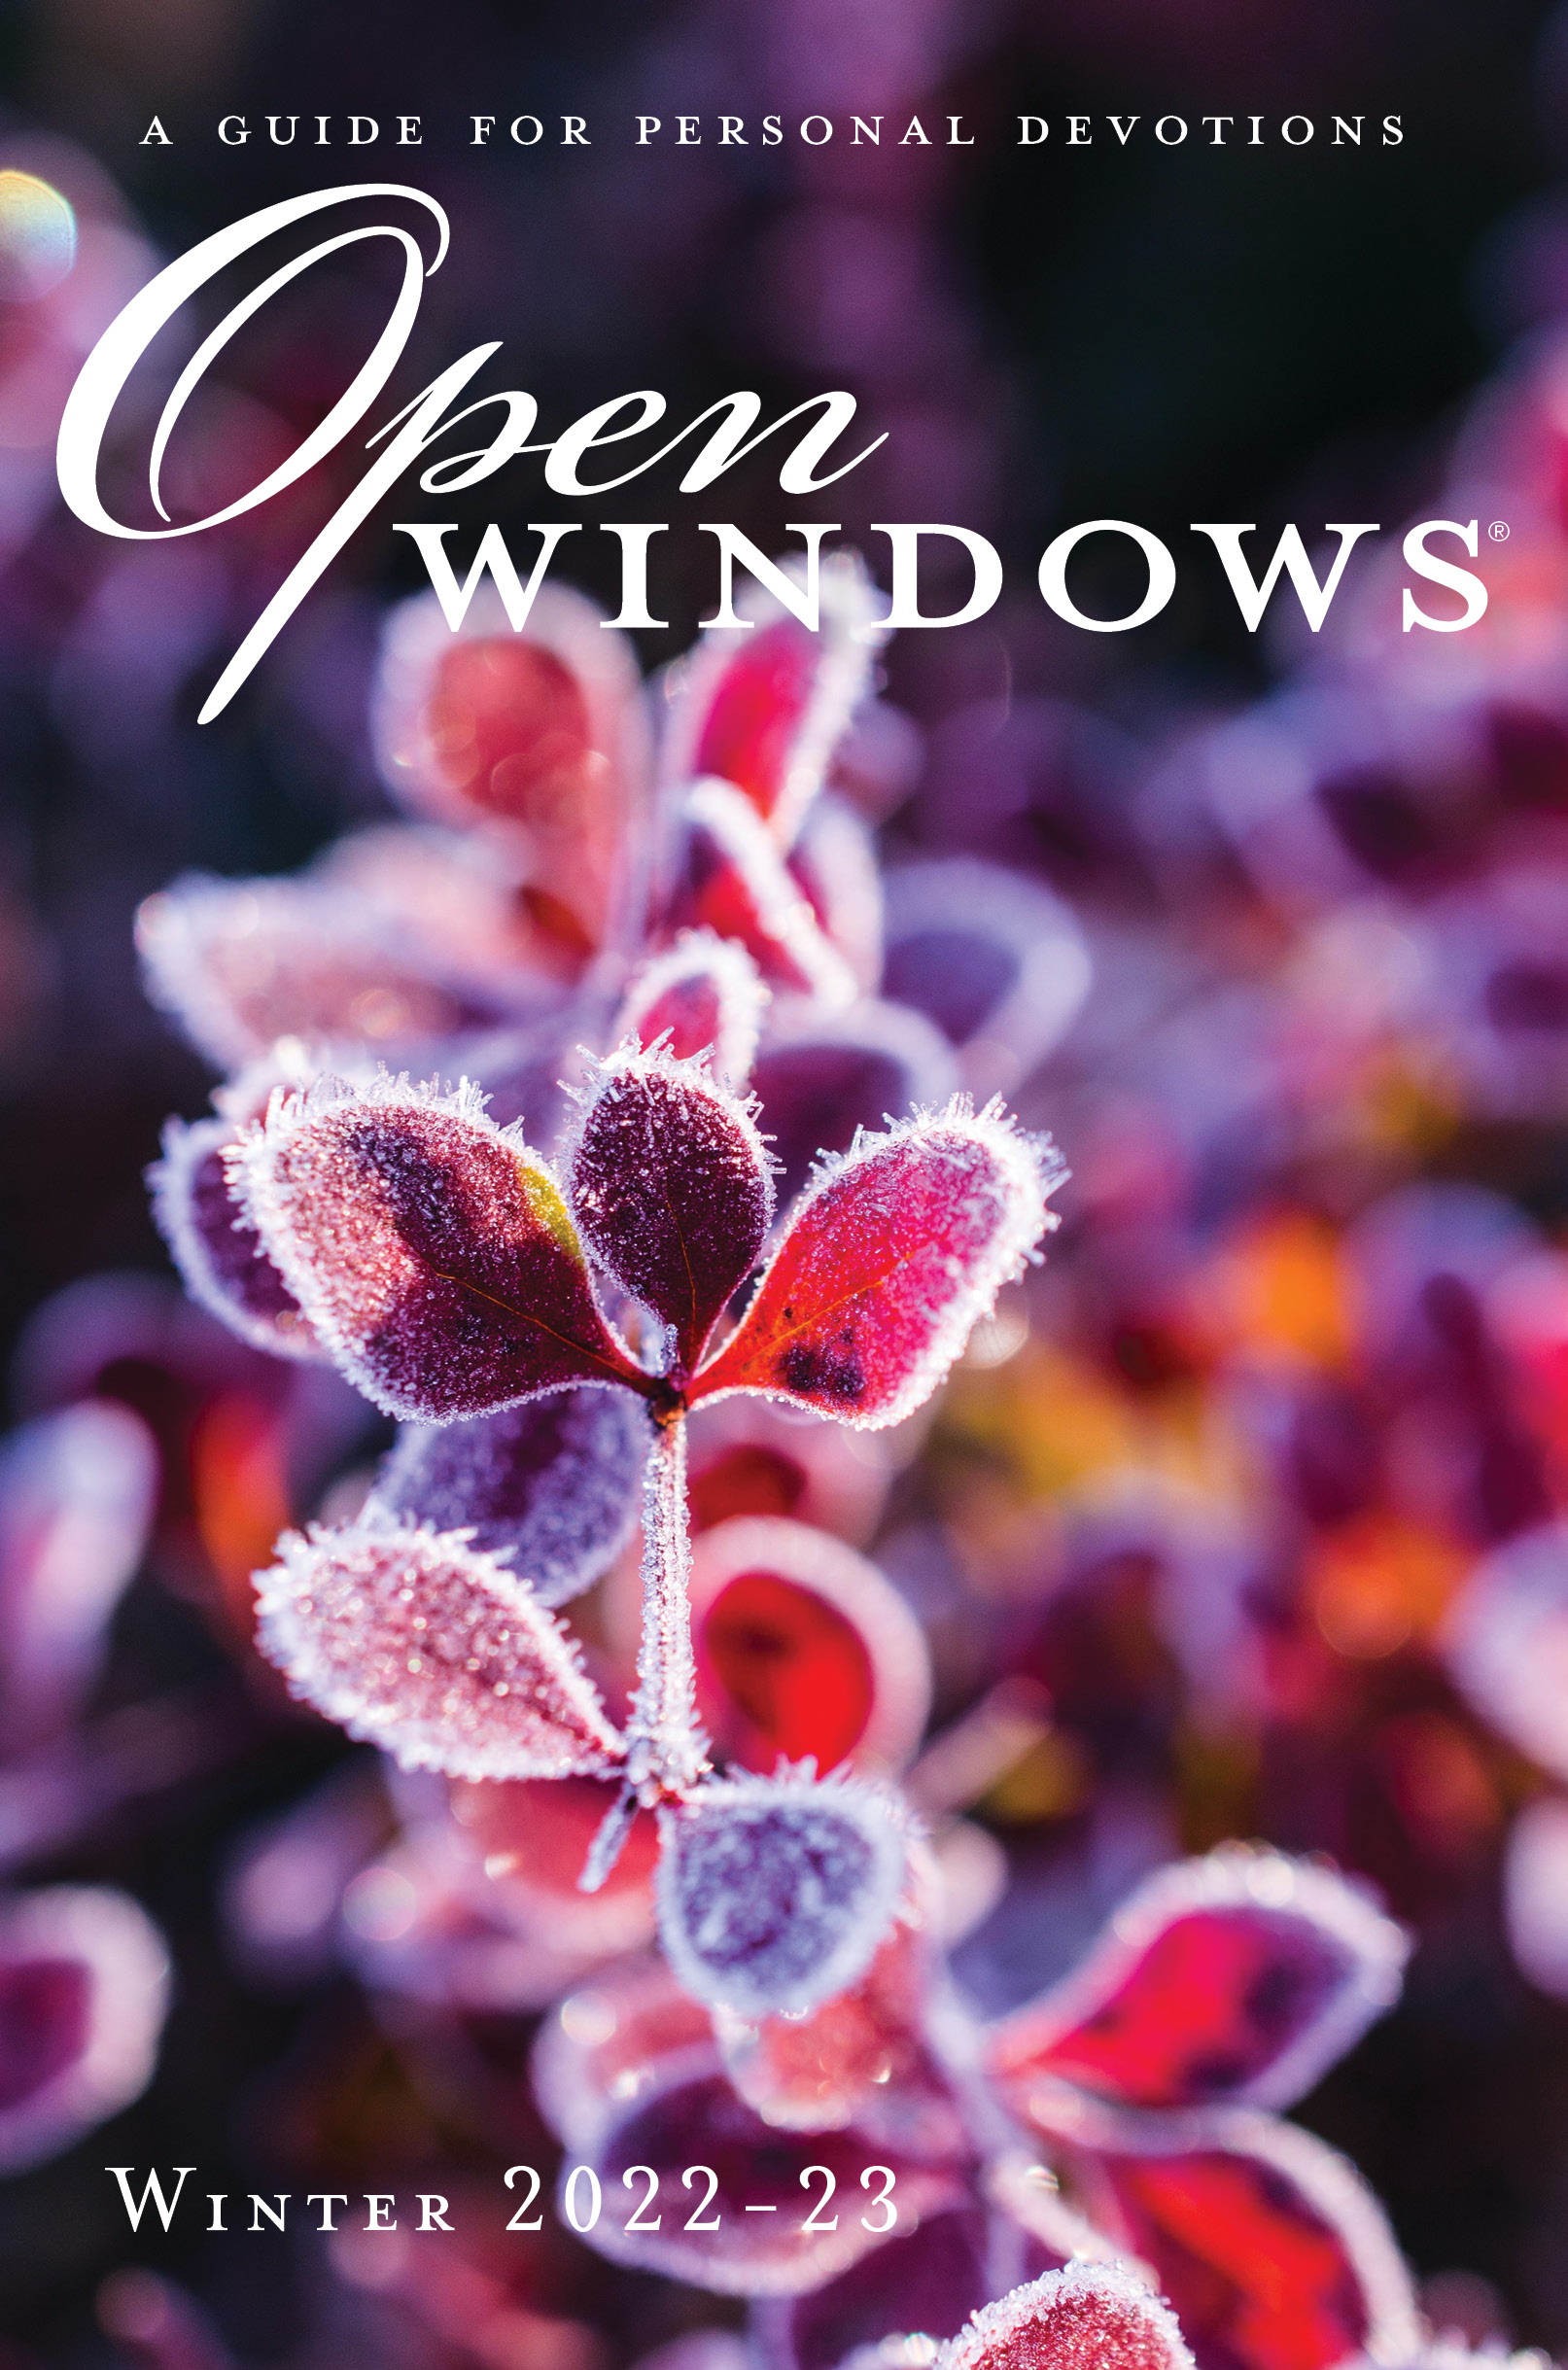 Open Windows Winter 2023 Free Delivery when you spend £10 at Eden.co.uk